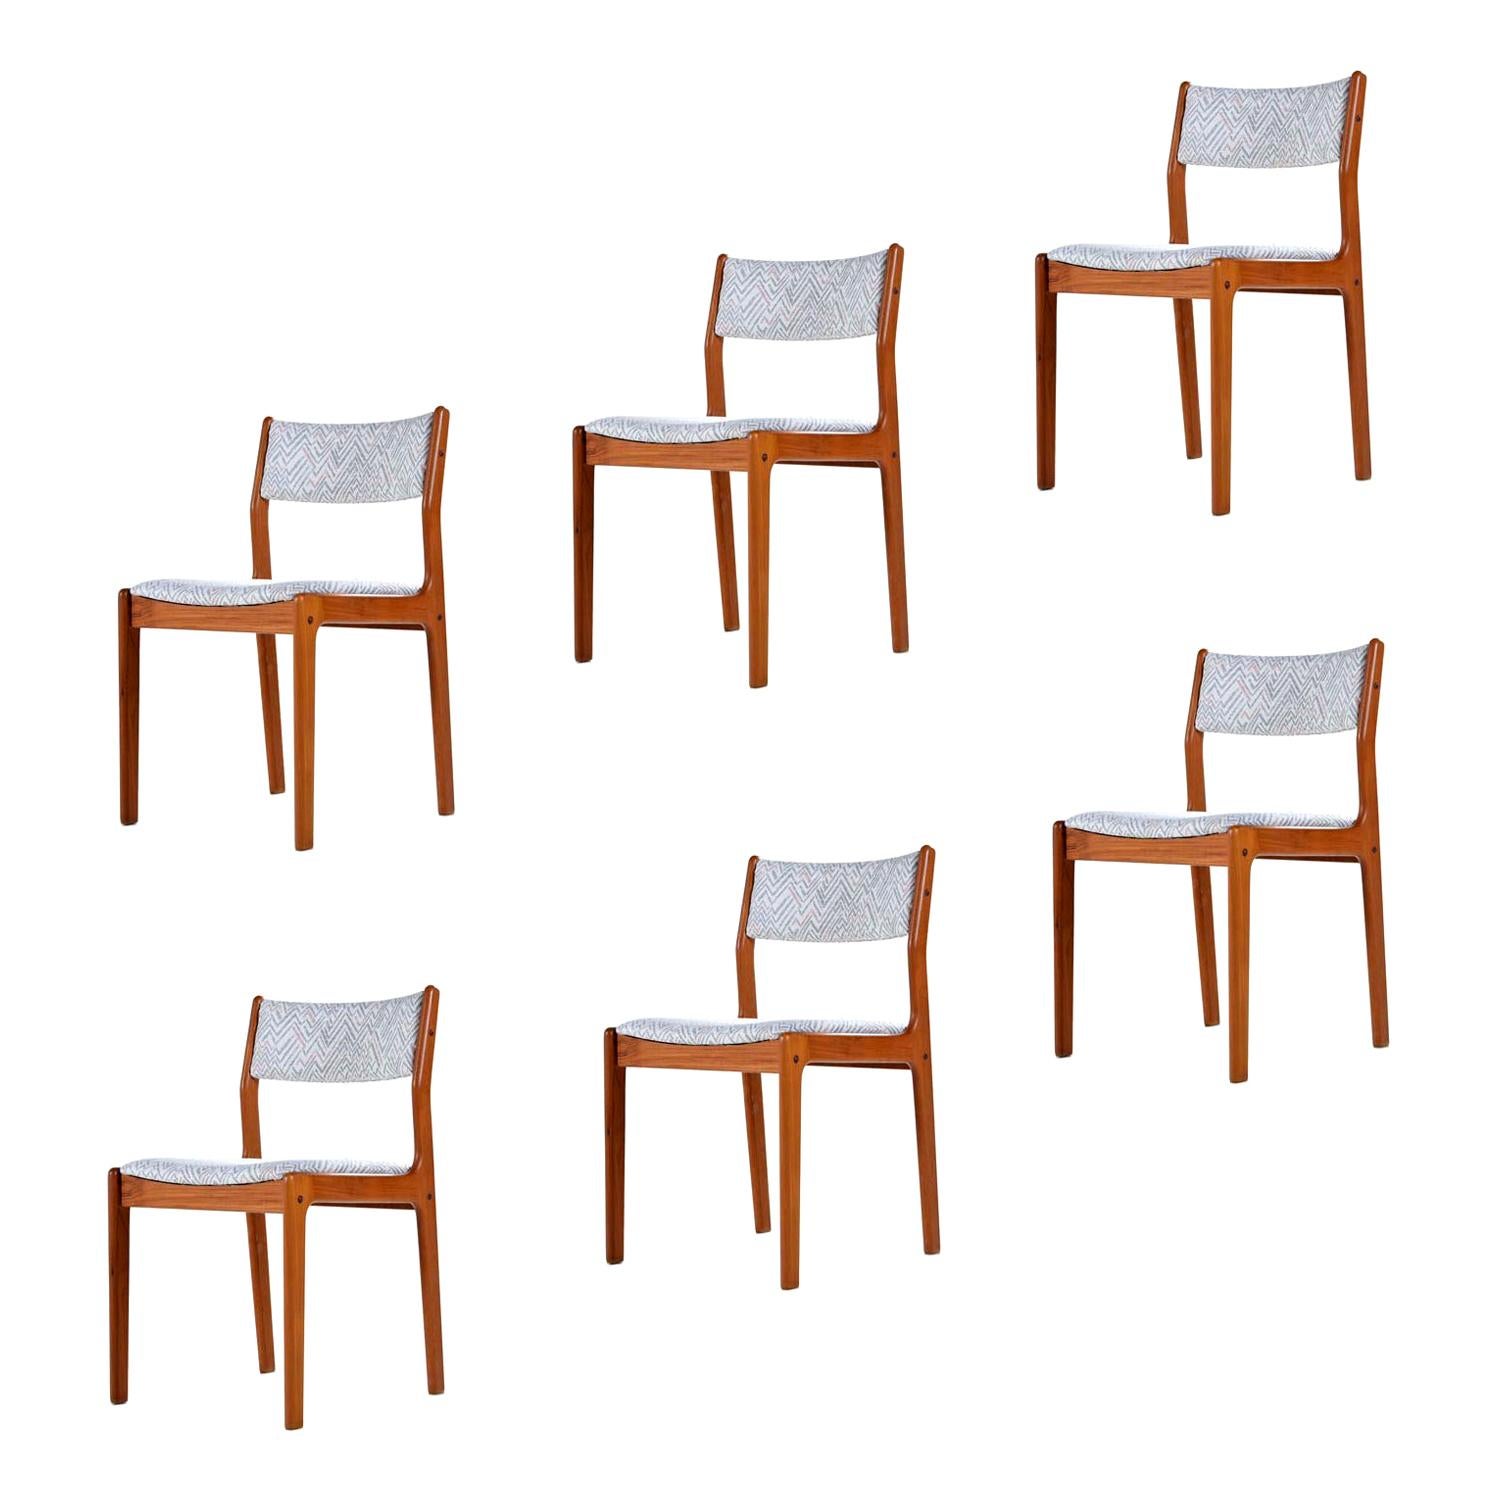 Danish Modern Teak Dining Chairs in White Gray and Pink Fabric